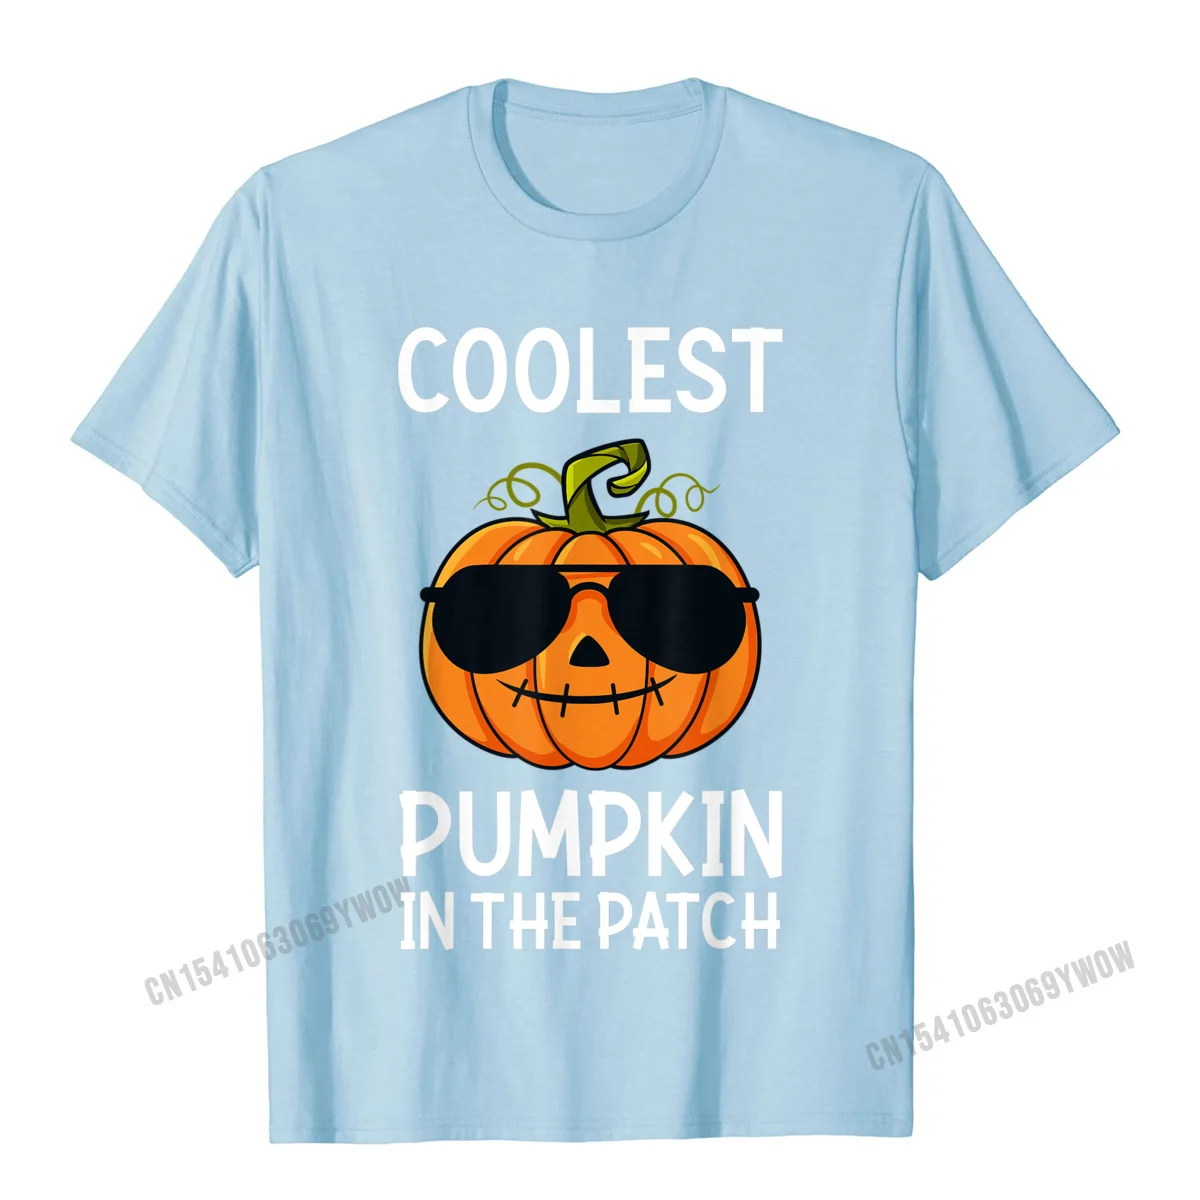 Pure Cotton Men Short Sleeve Casual Top T-shirts Camisa Tops Shirts Newest Normal O-Neck Tee Shirts Wholesale Halloween Coolest Pumpkin In The Patch Boys Girls Kids T-Shirt__659 light